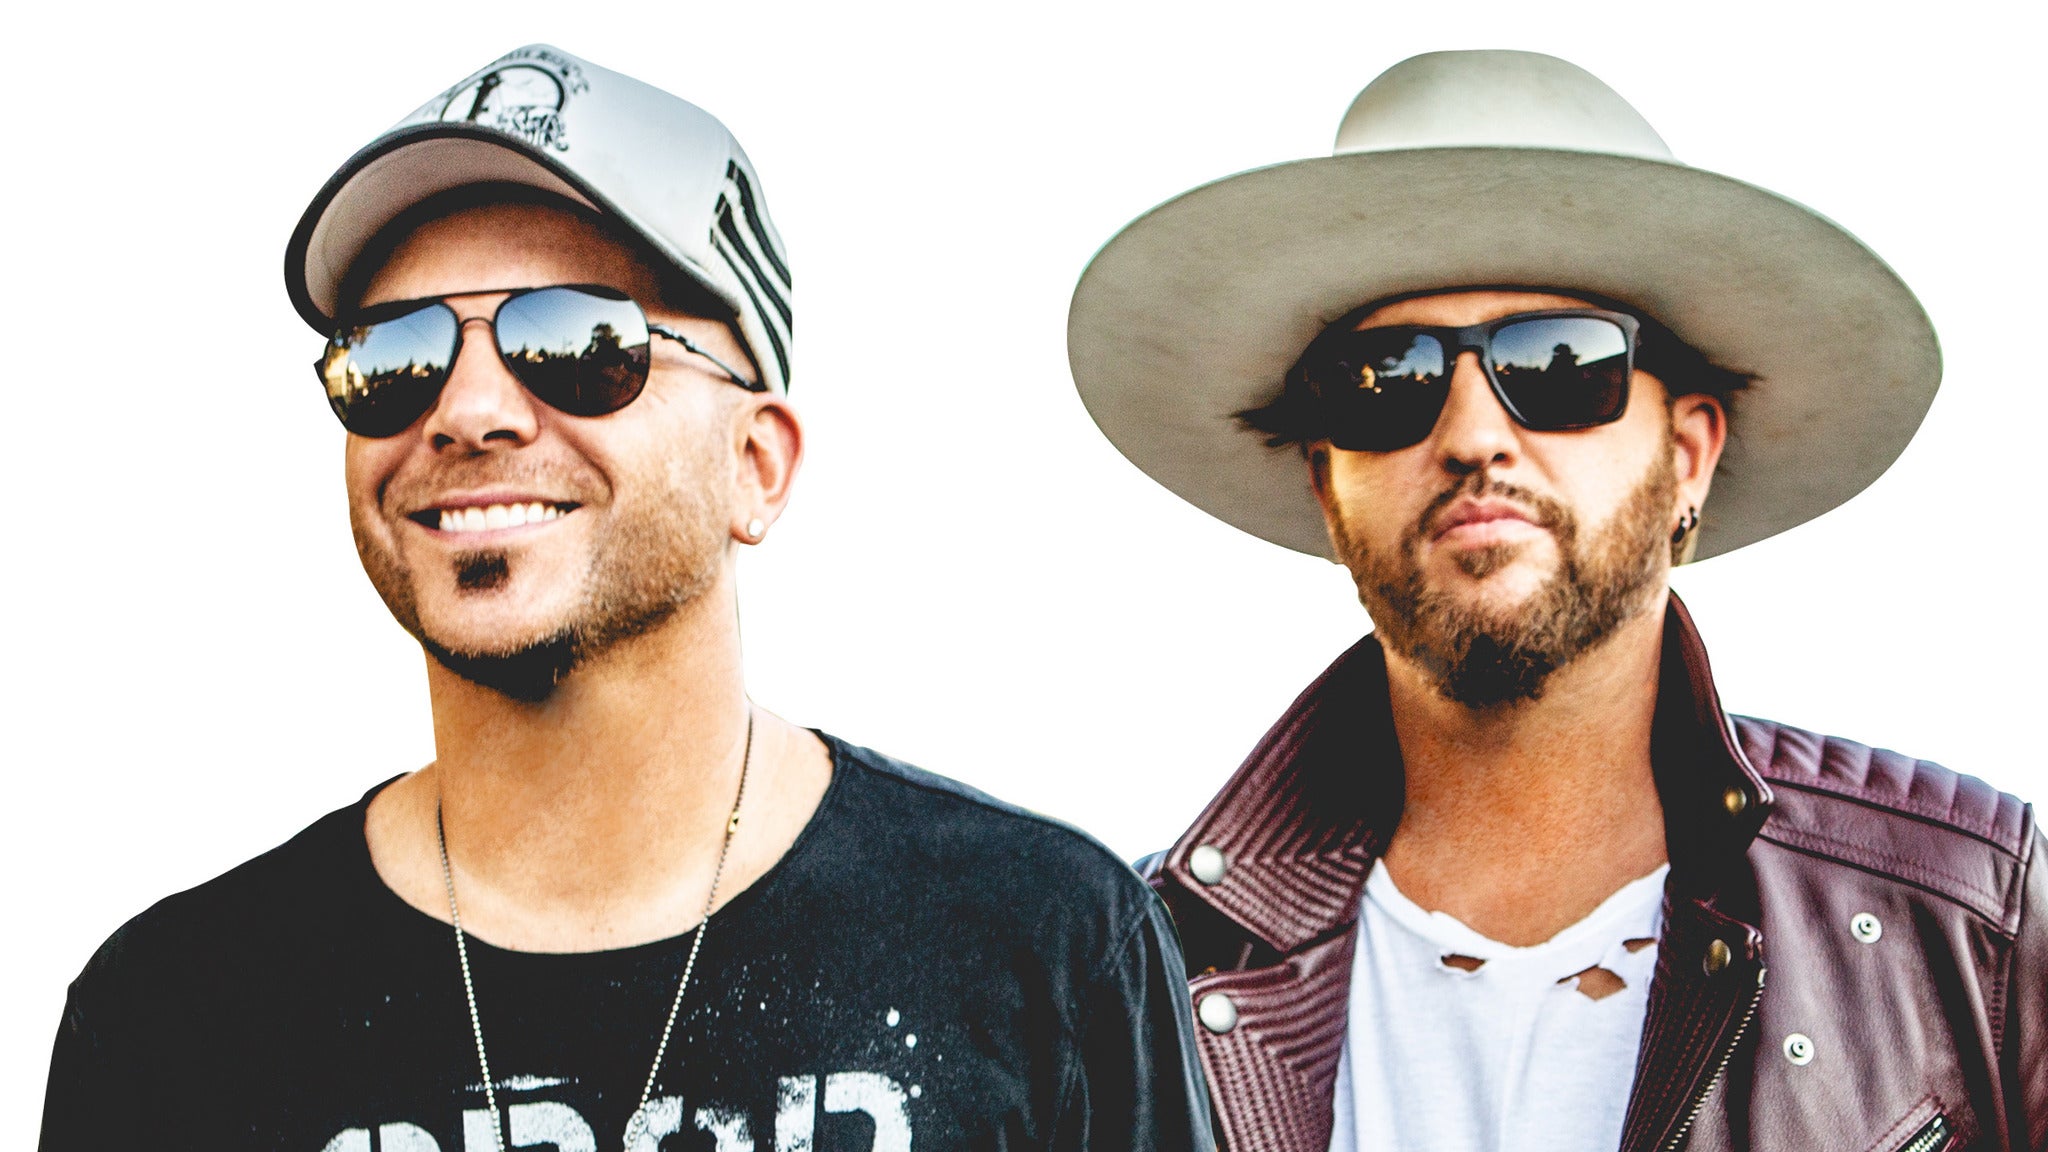 LOCASH in North Myrtle Beach promo photo for Official Platinum Public Onsale presale offer code